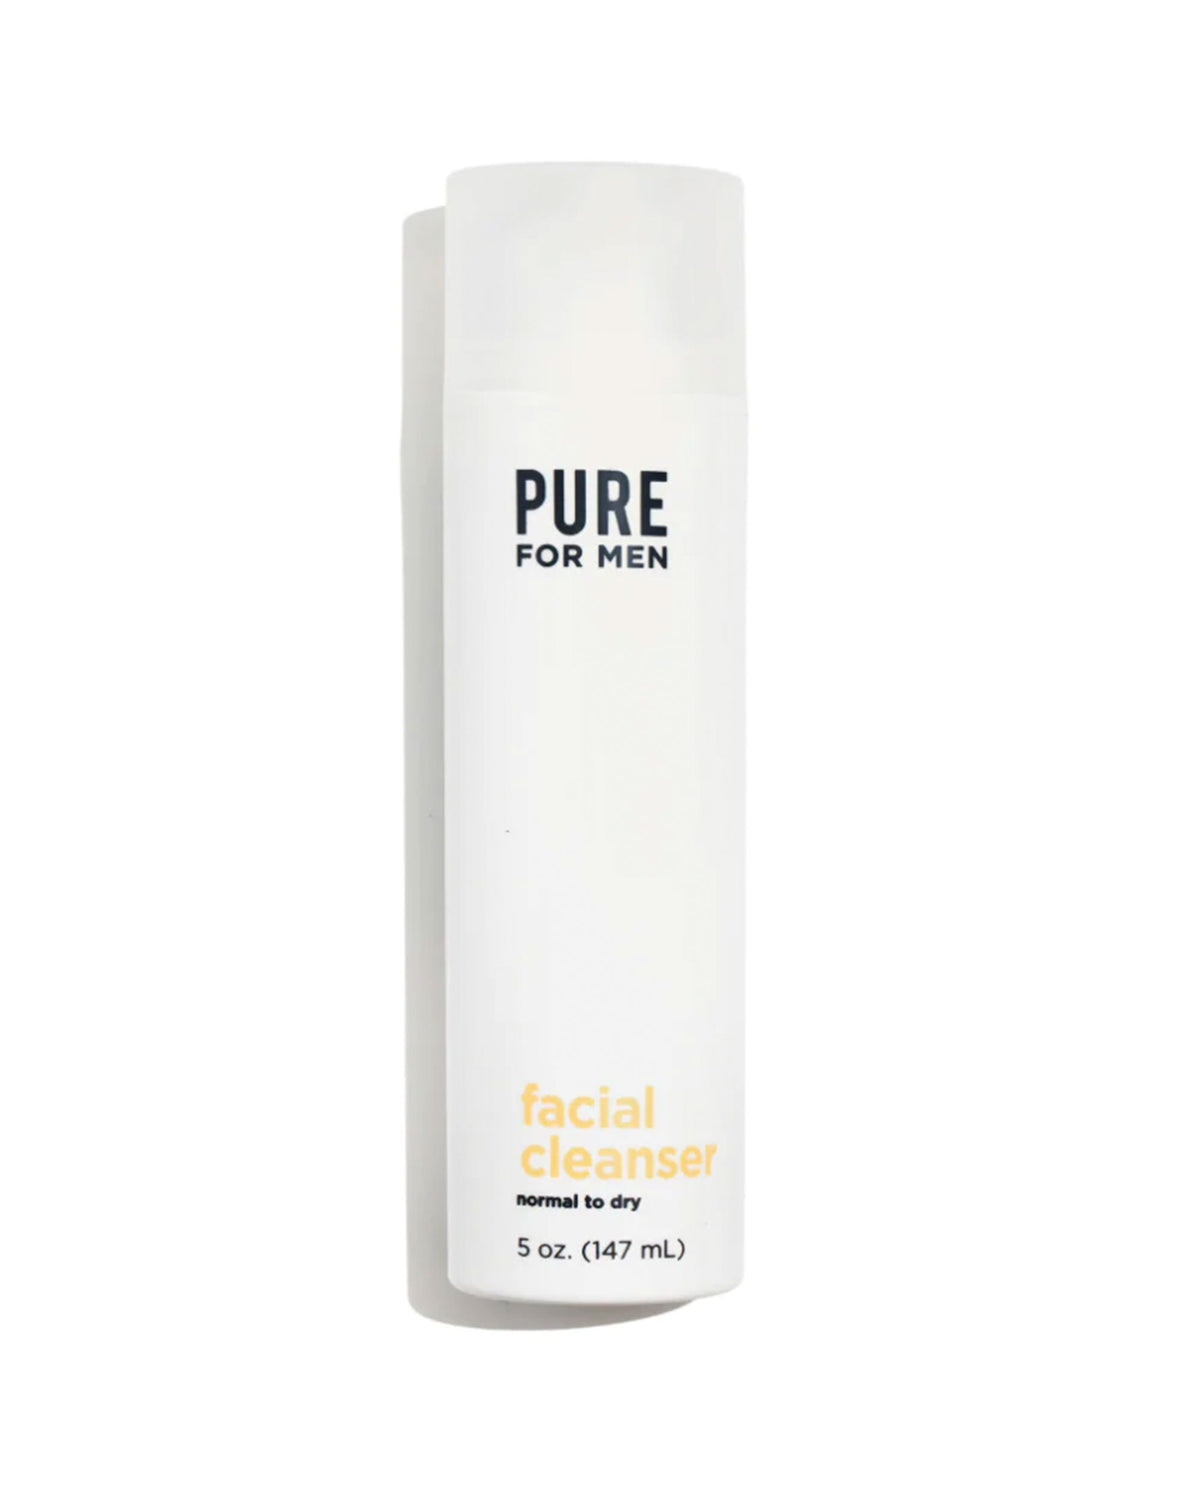 Facial Cleanser - Normal to Dry